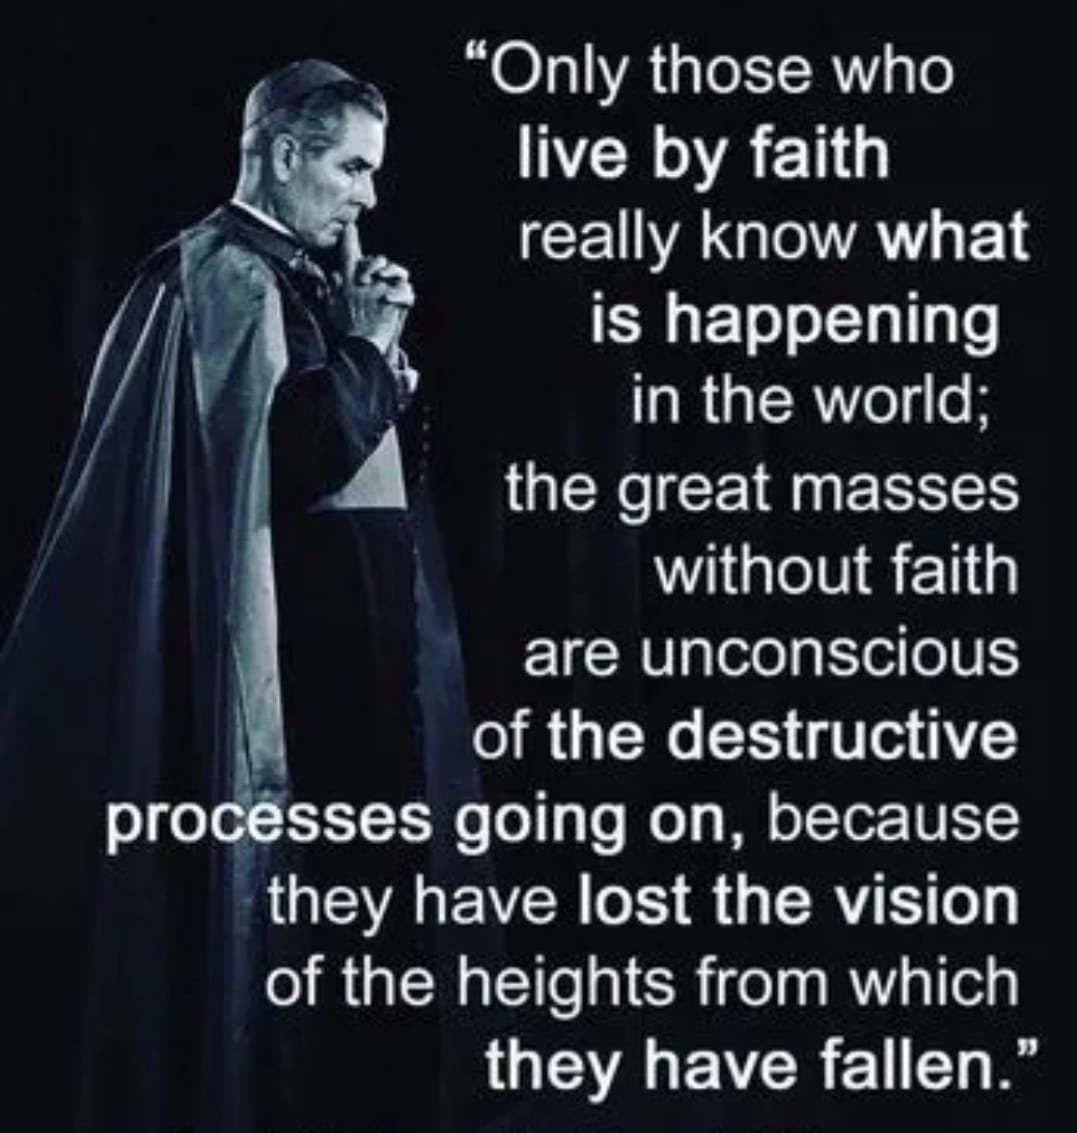 May be an image of 1 person and text that says '"Only those who live by faith really know what is happening in the world; the great masses without faith are unconscious of the destructive processes going on, because they have lost the vision of the heights from which they have fallen."'